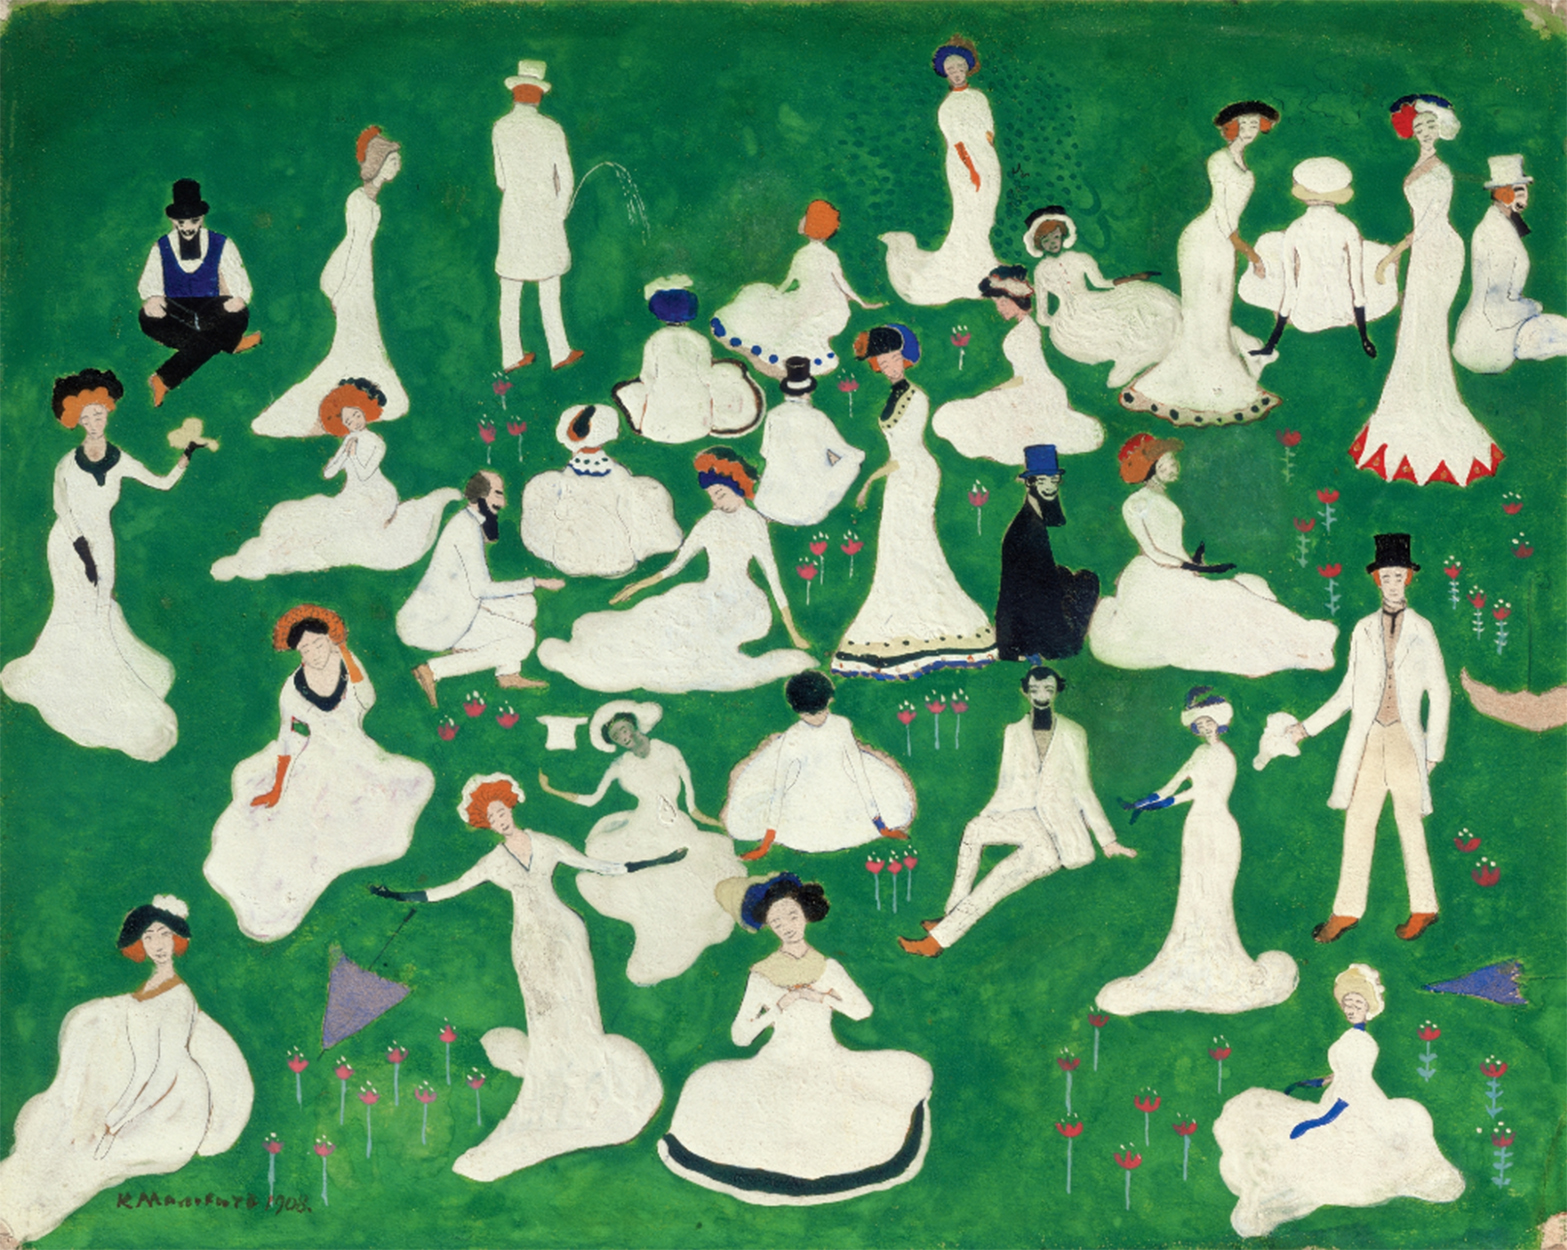 Relaxing (Society in Top Hats) by Kazimir Malevich - 1908 - 23,8 x 30,2 cm State Russian Museum